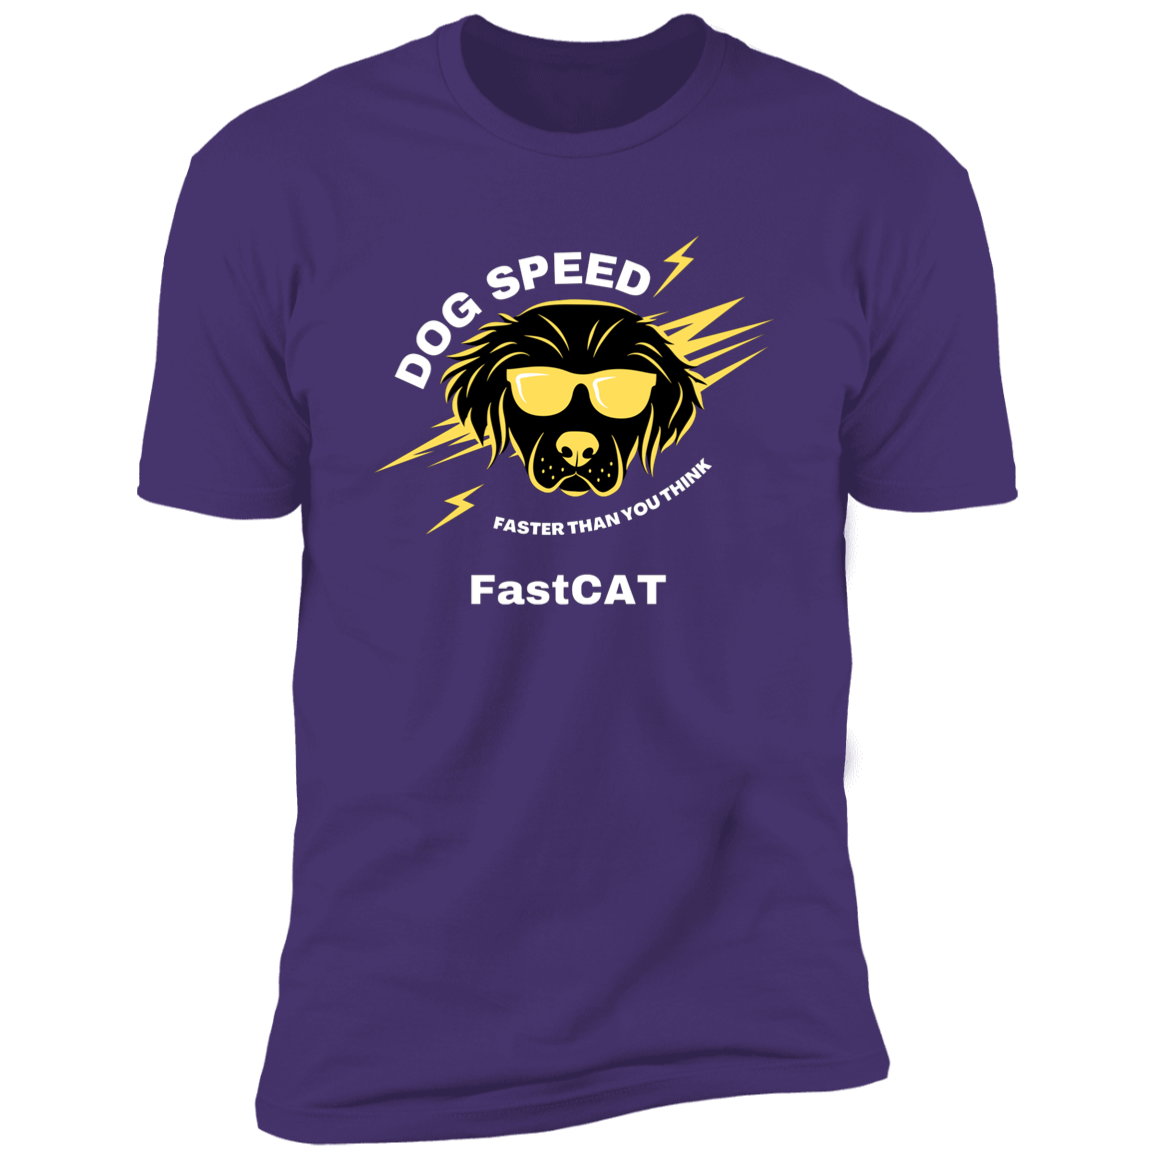 Dog Speed Faster Than You Think FastCAT T-shirt, FastCAT shirt dog shirt for humans, in purple rush.